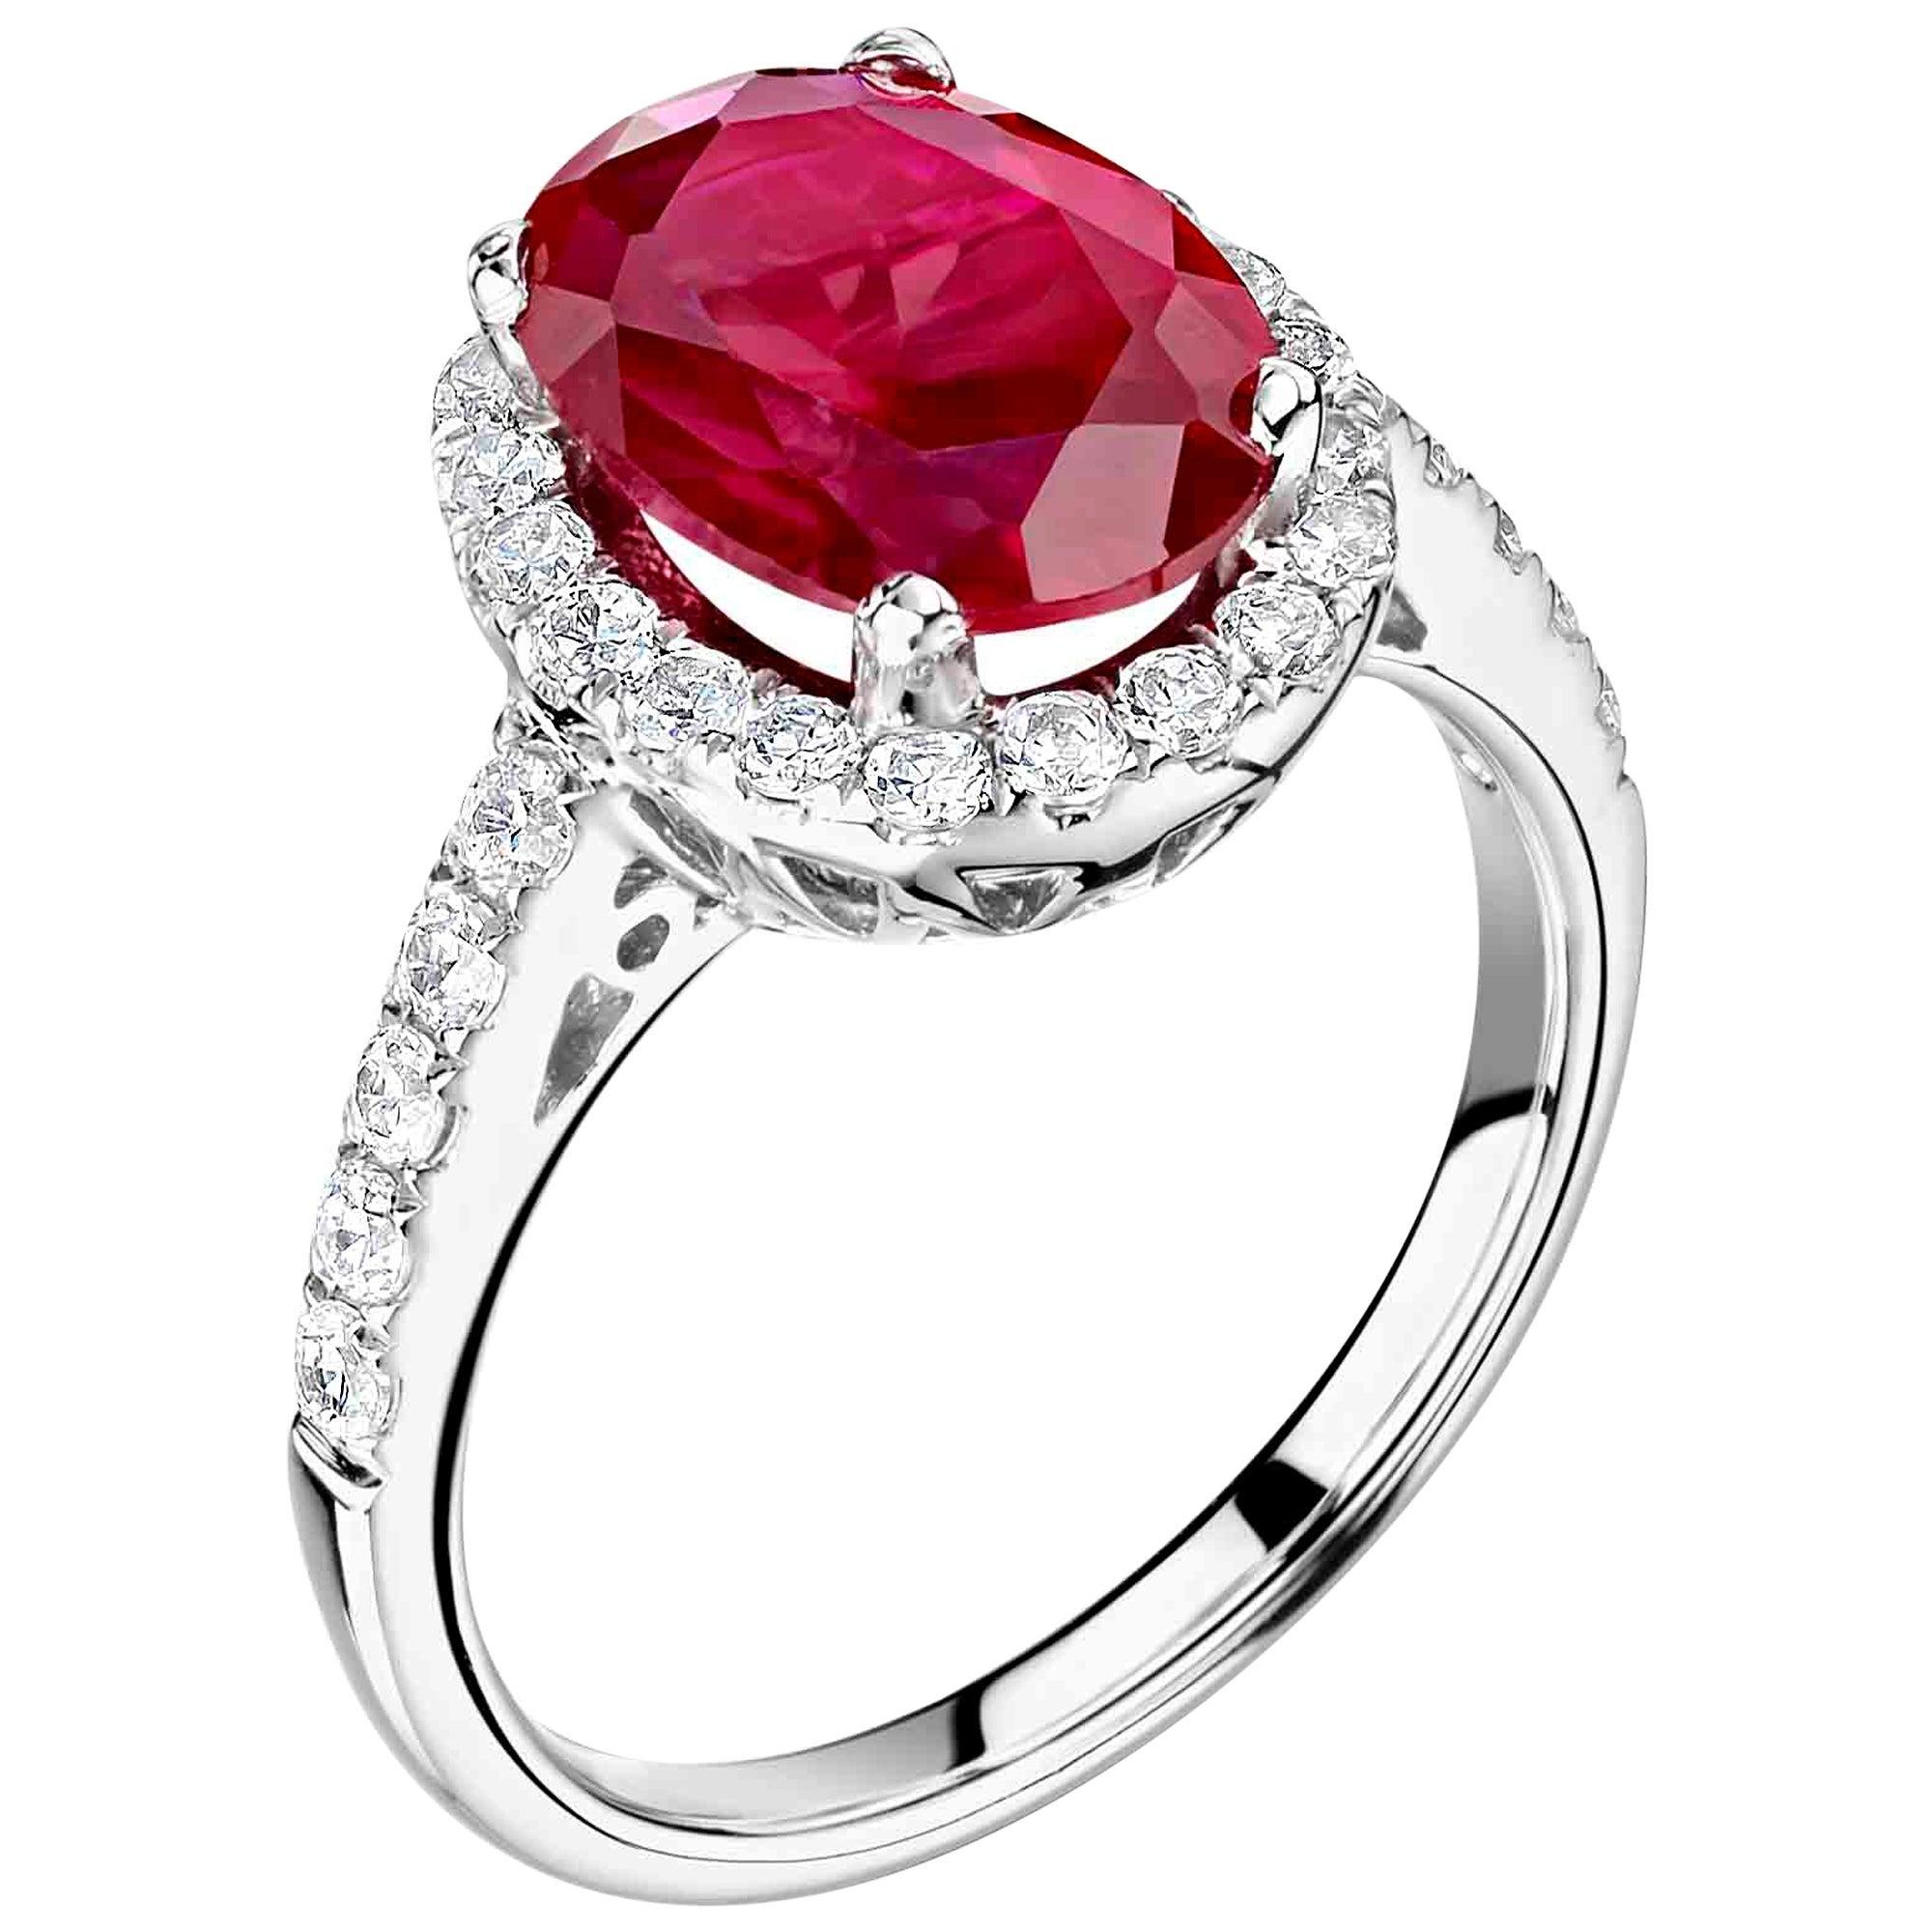 Oval Cut 1 Carat Ruby and Diamond Bespoke Halo Ring in Platinum For Sale